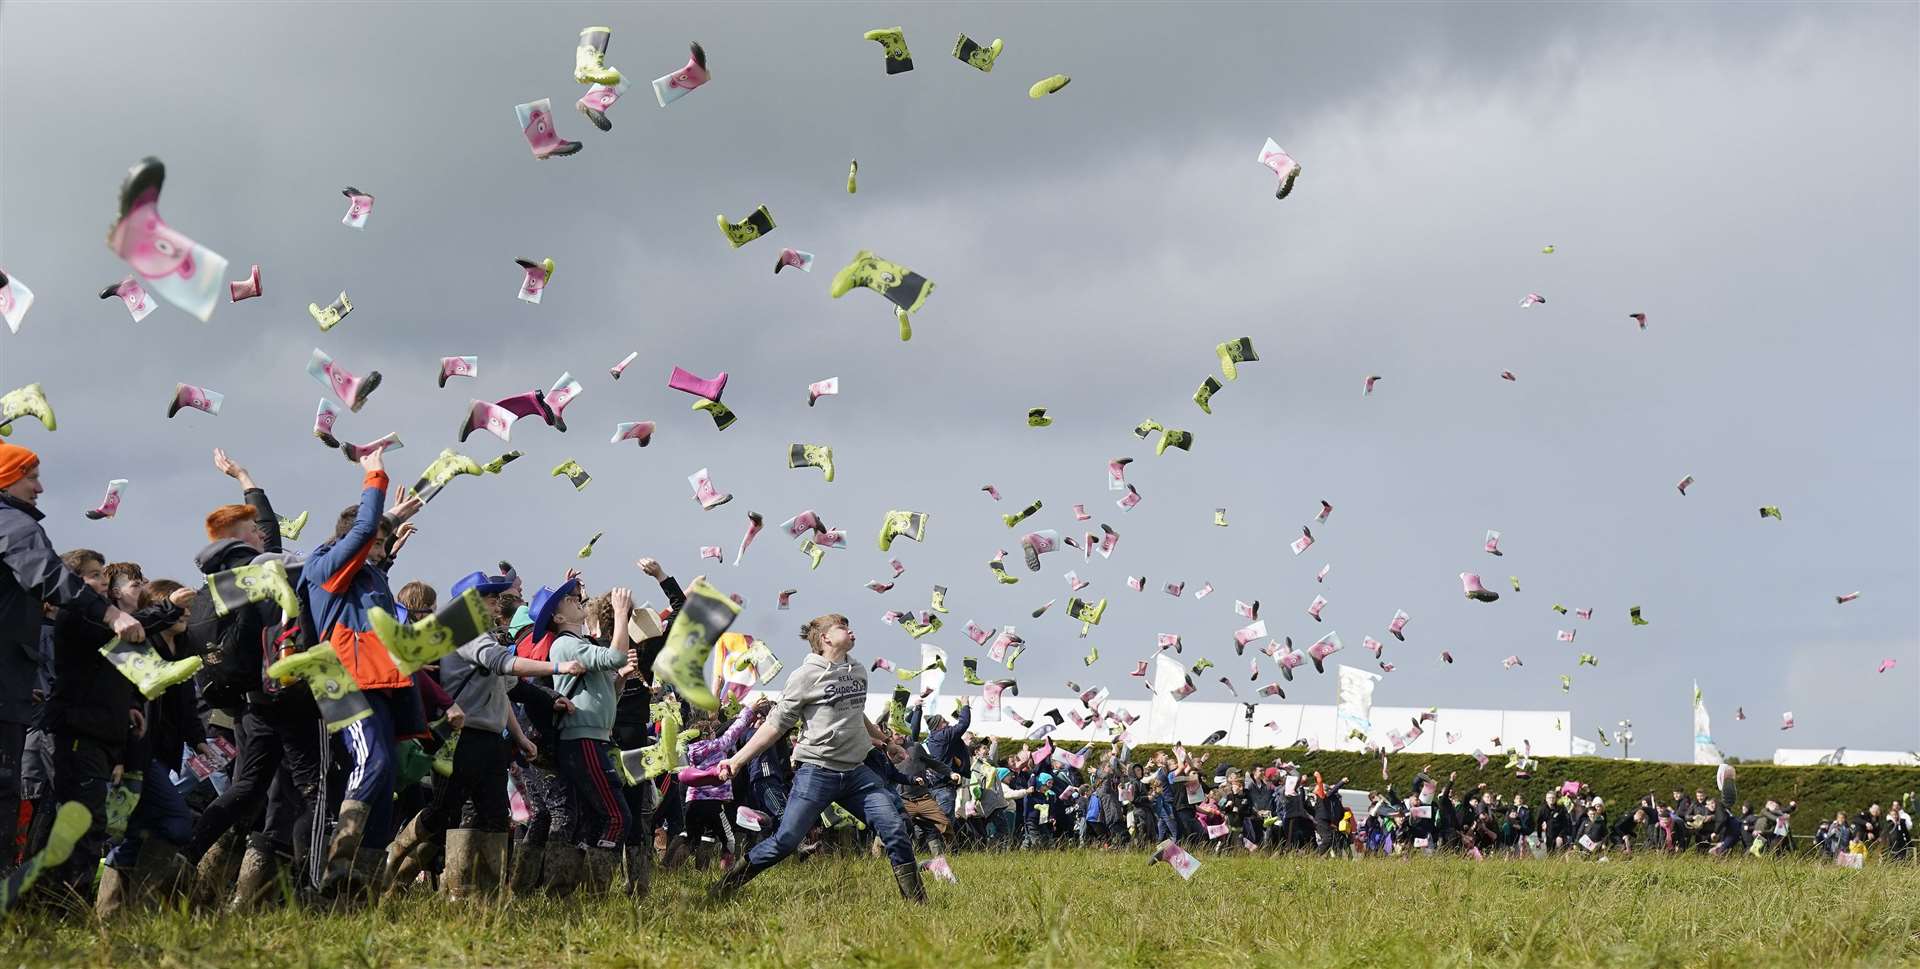 Organisers said the wellies needed to be thrown at the same time to beat the record (Niall Carson/PA)